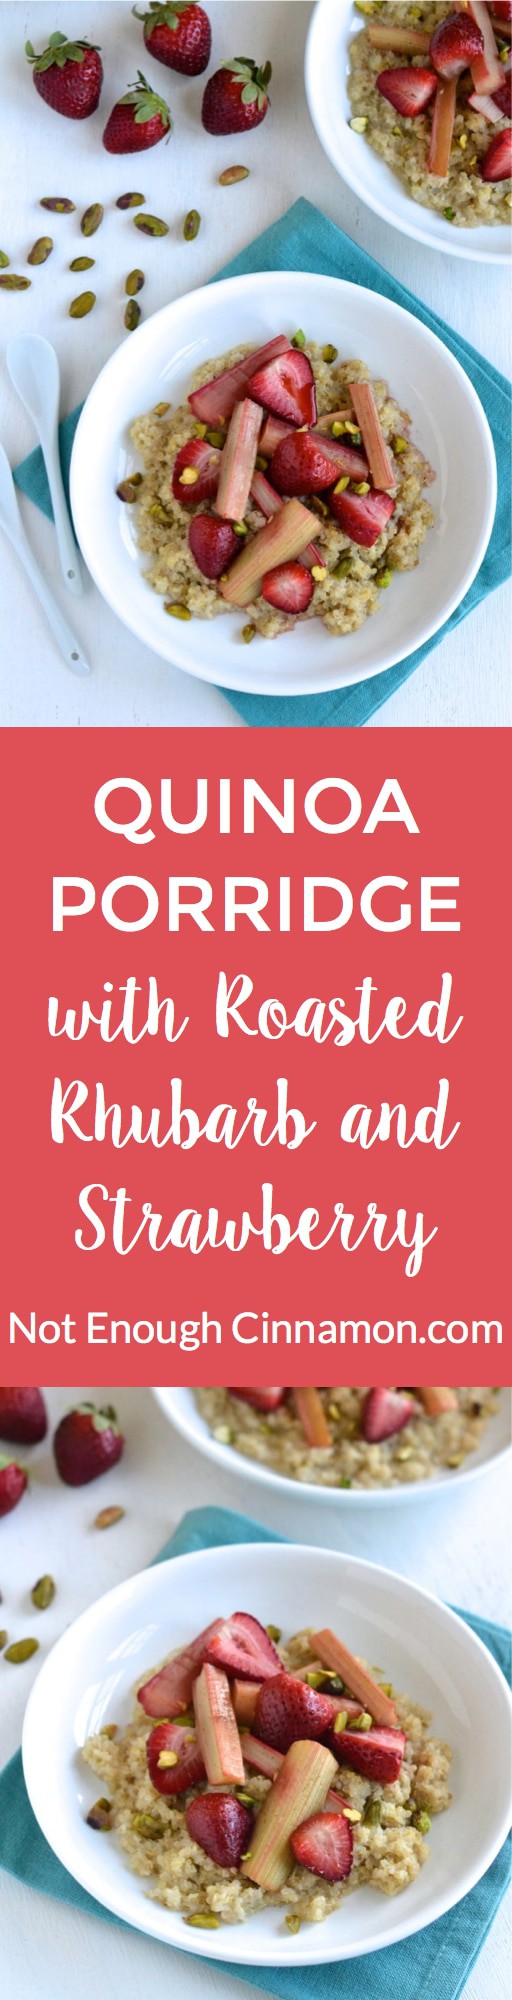 Quinoa Porridge with Roasted Rhubarb and Strawberries - A perfect breakfast and brunch recipe! Gluten free and vegan – NotEnoughCinnamon.com